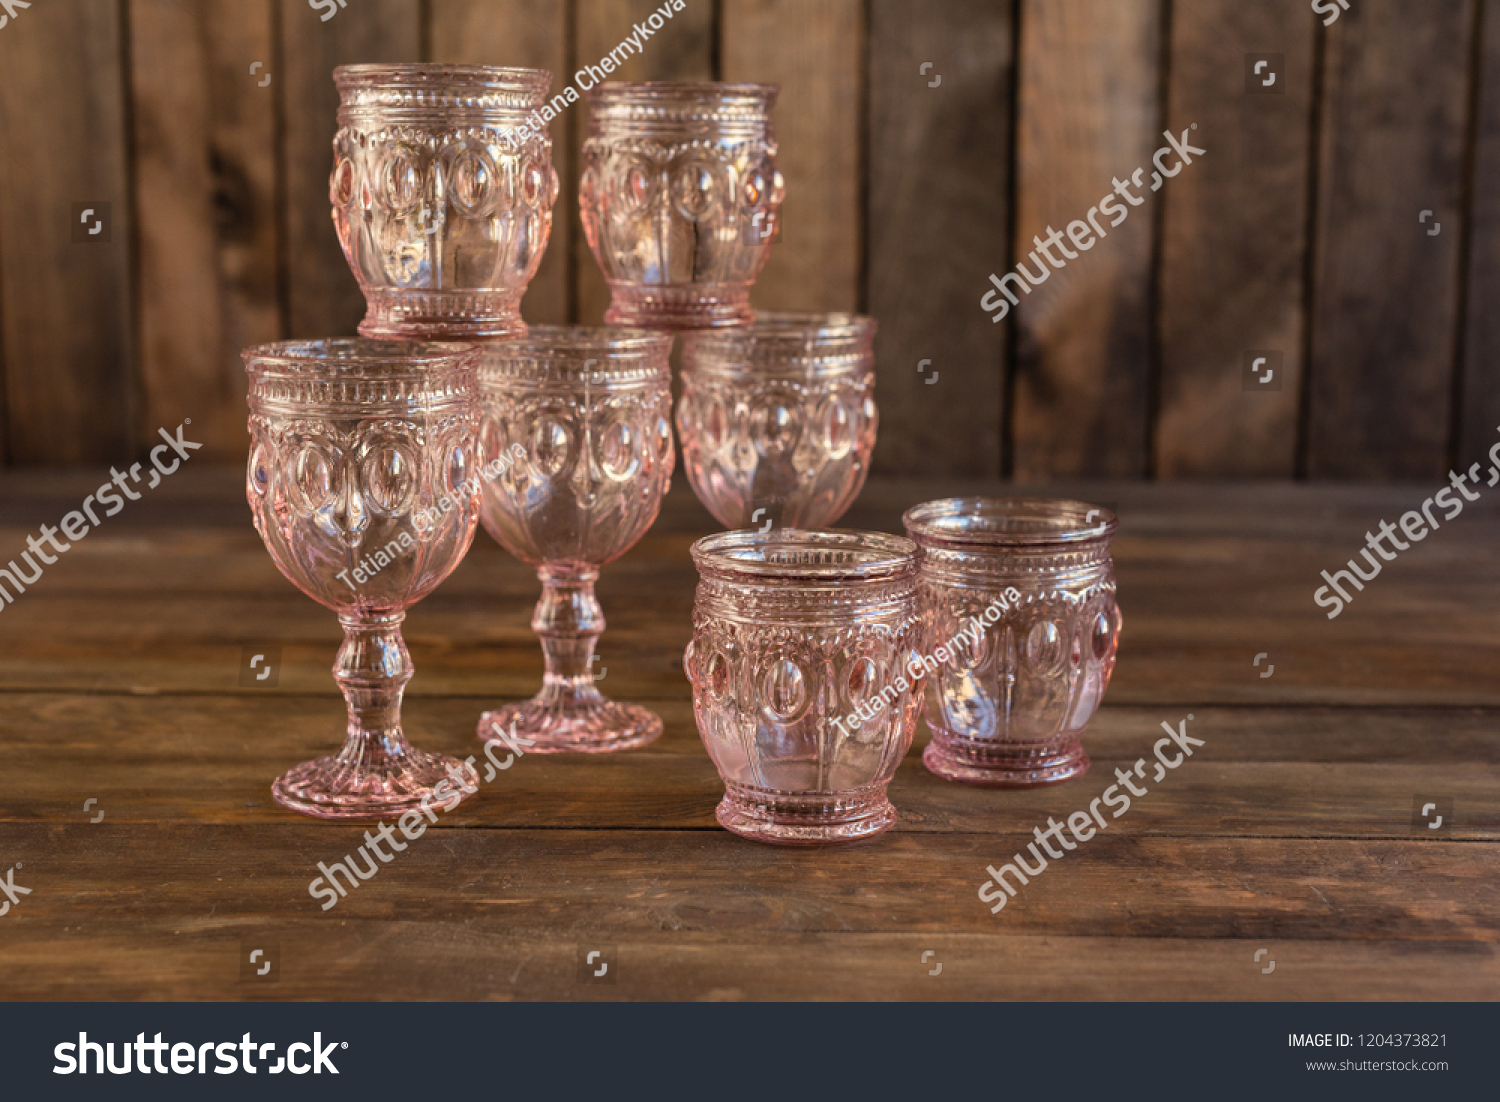 Beautiful glasses on a dark wooden background #1204373821